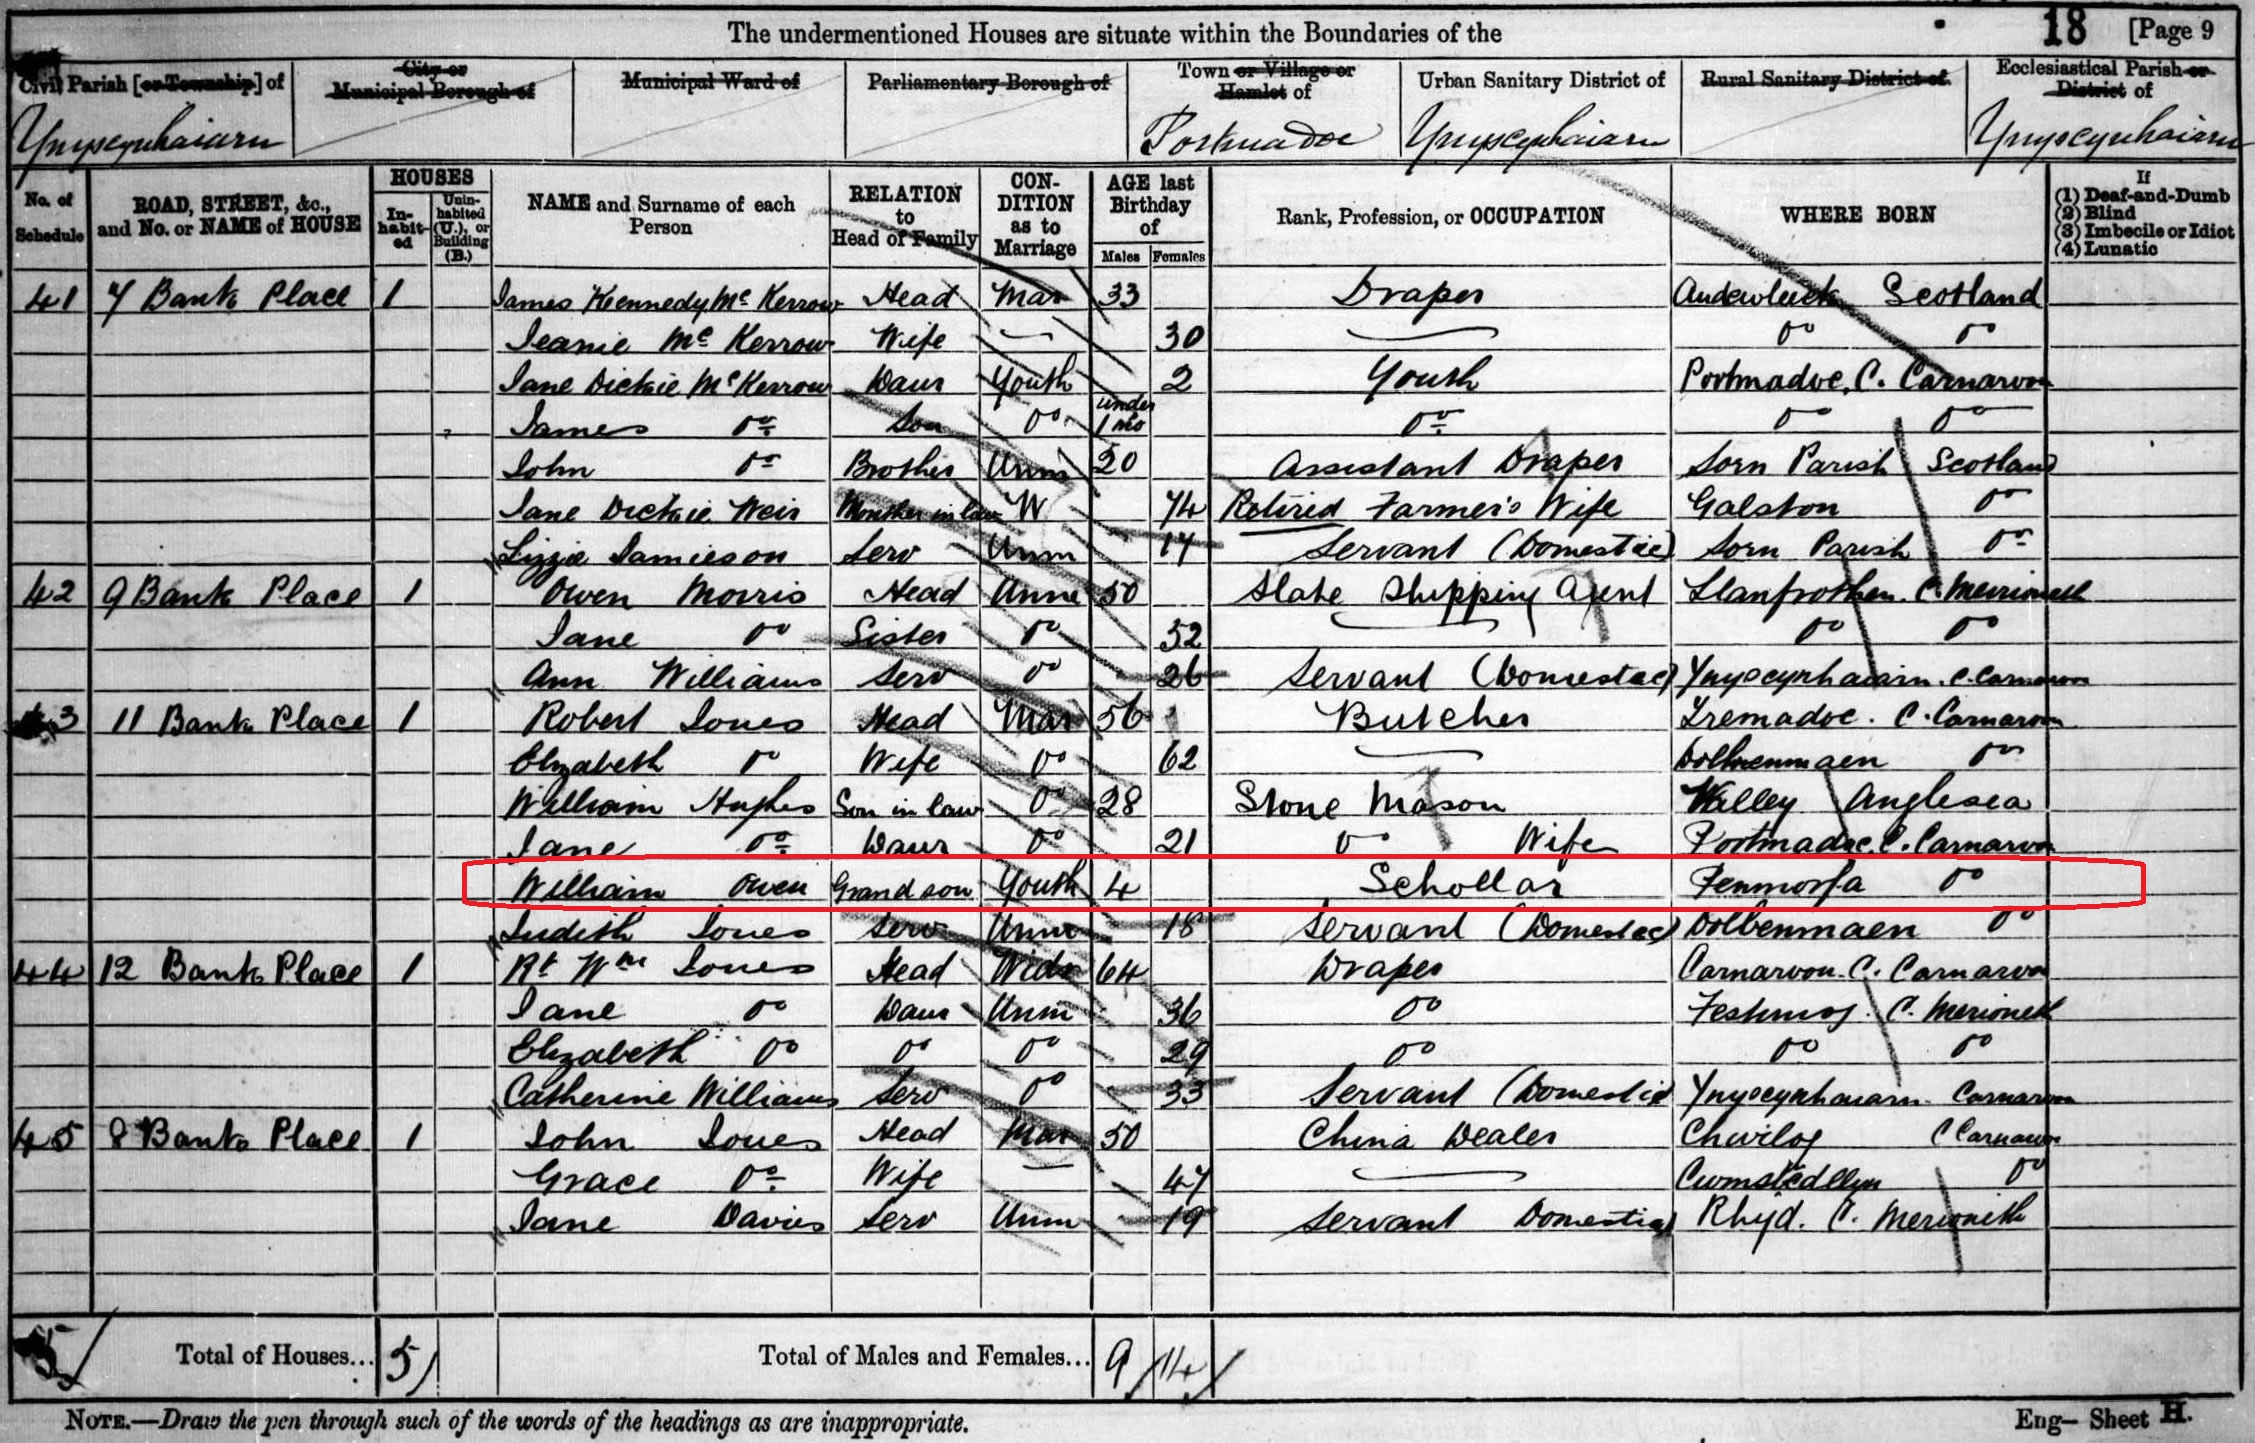 1881 census with 4 year old William in the care of his grandparents.